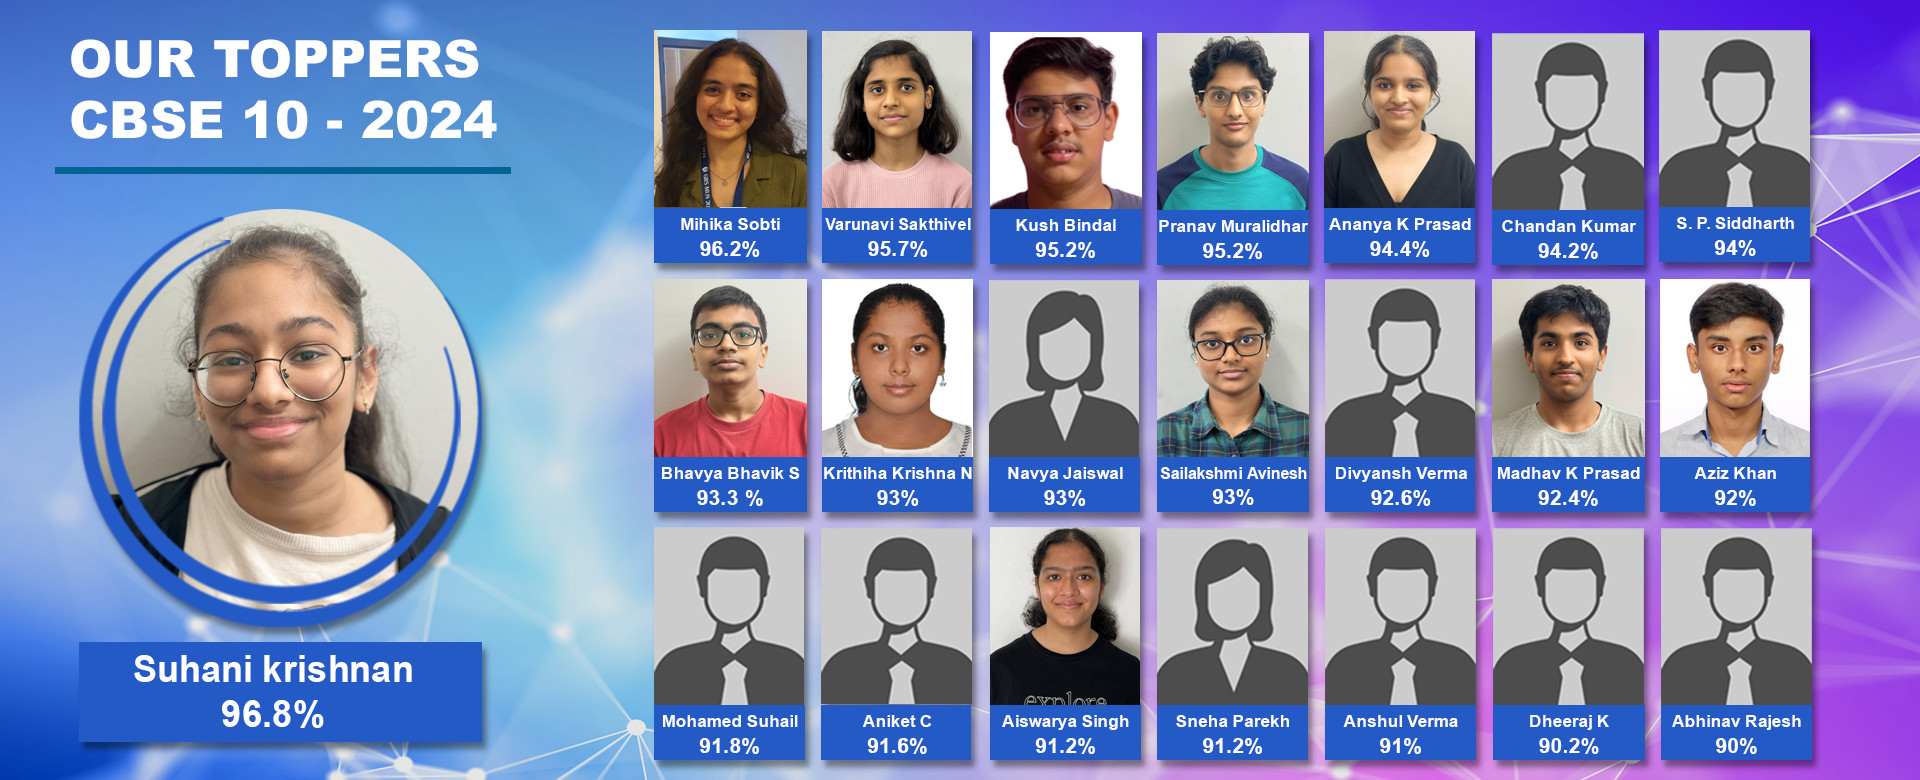 CBSE 10 Toppers - 2024